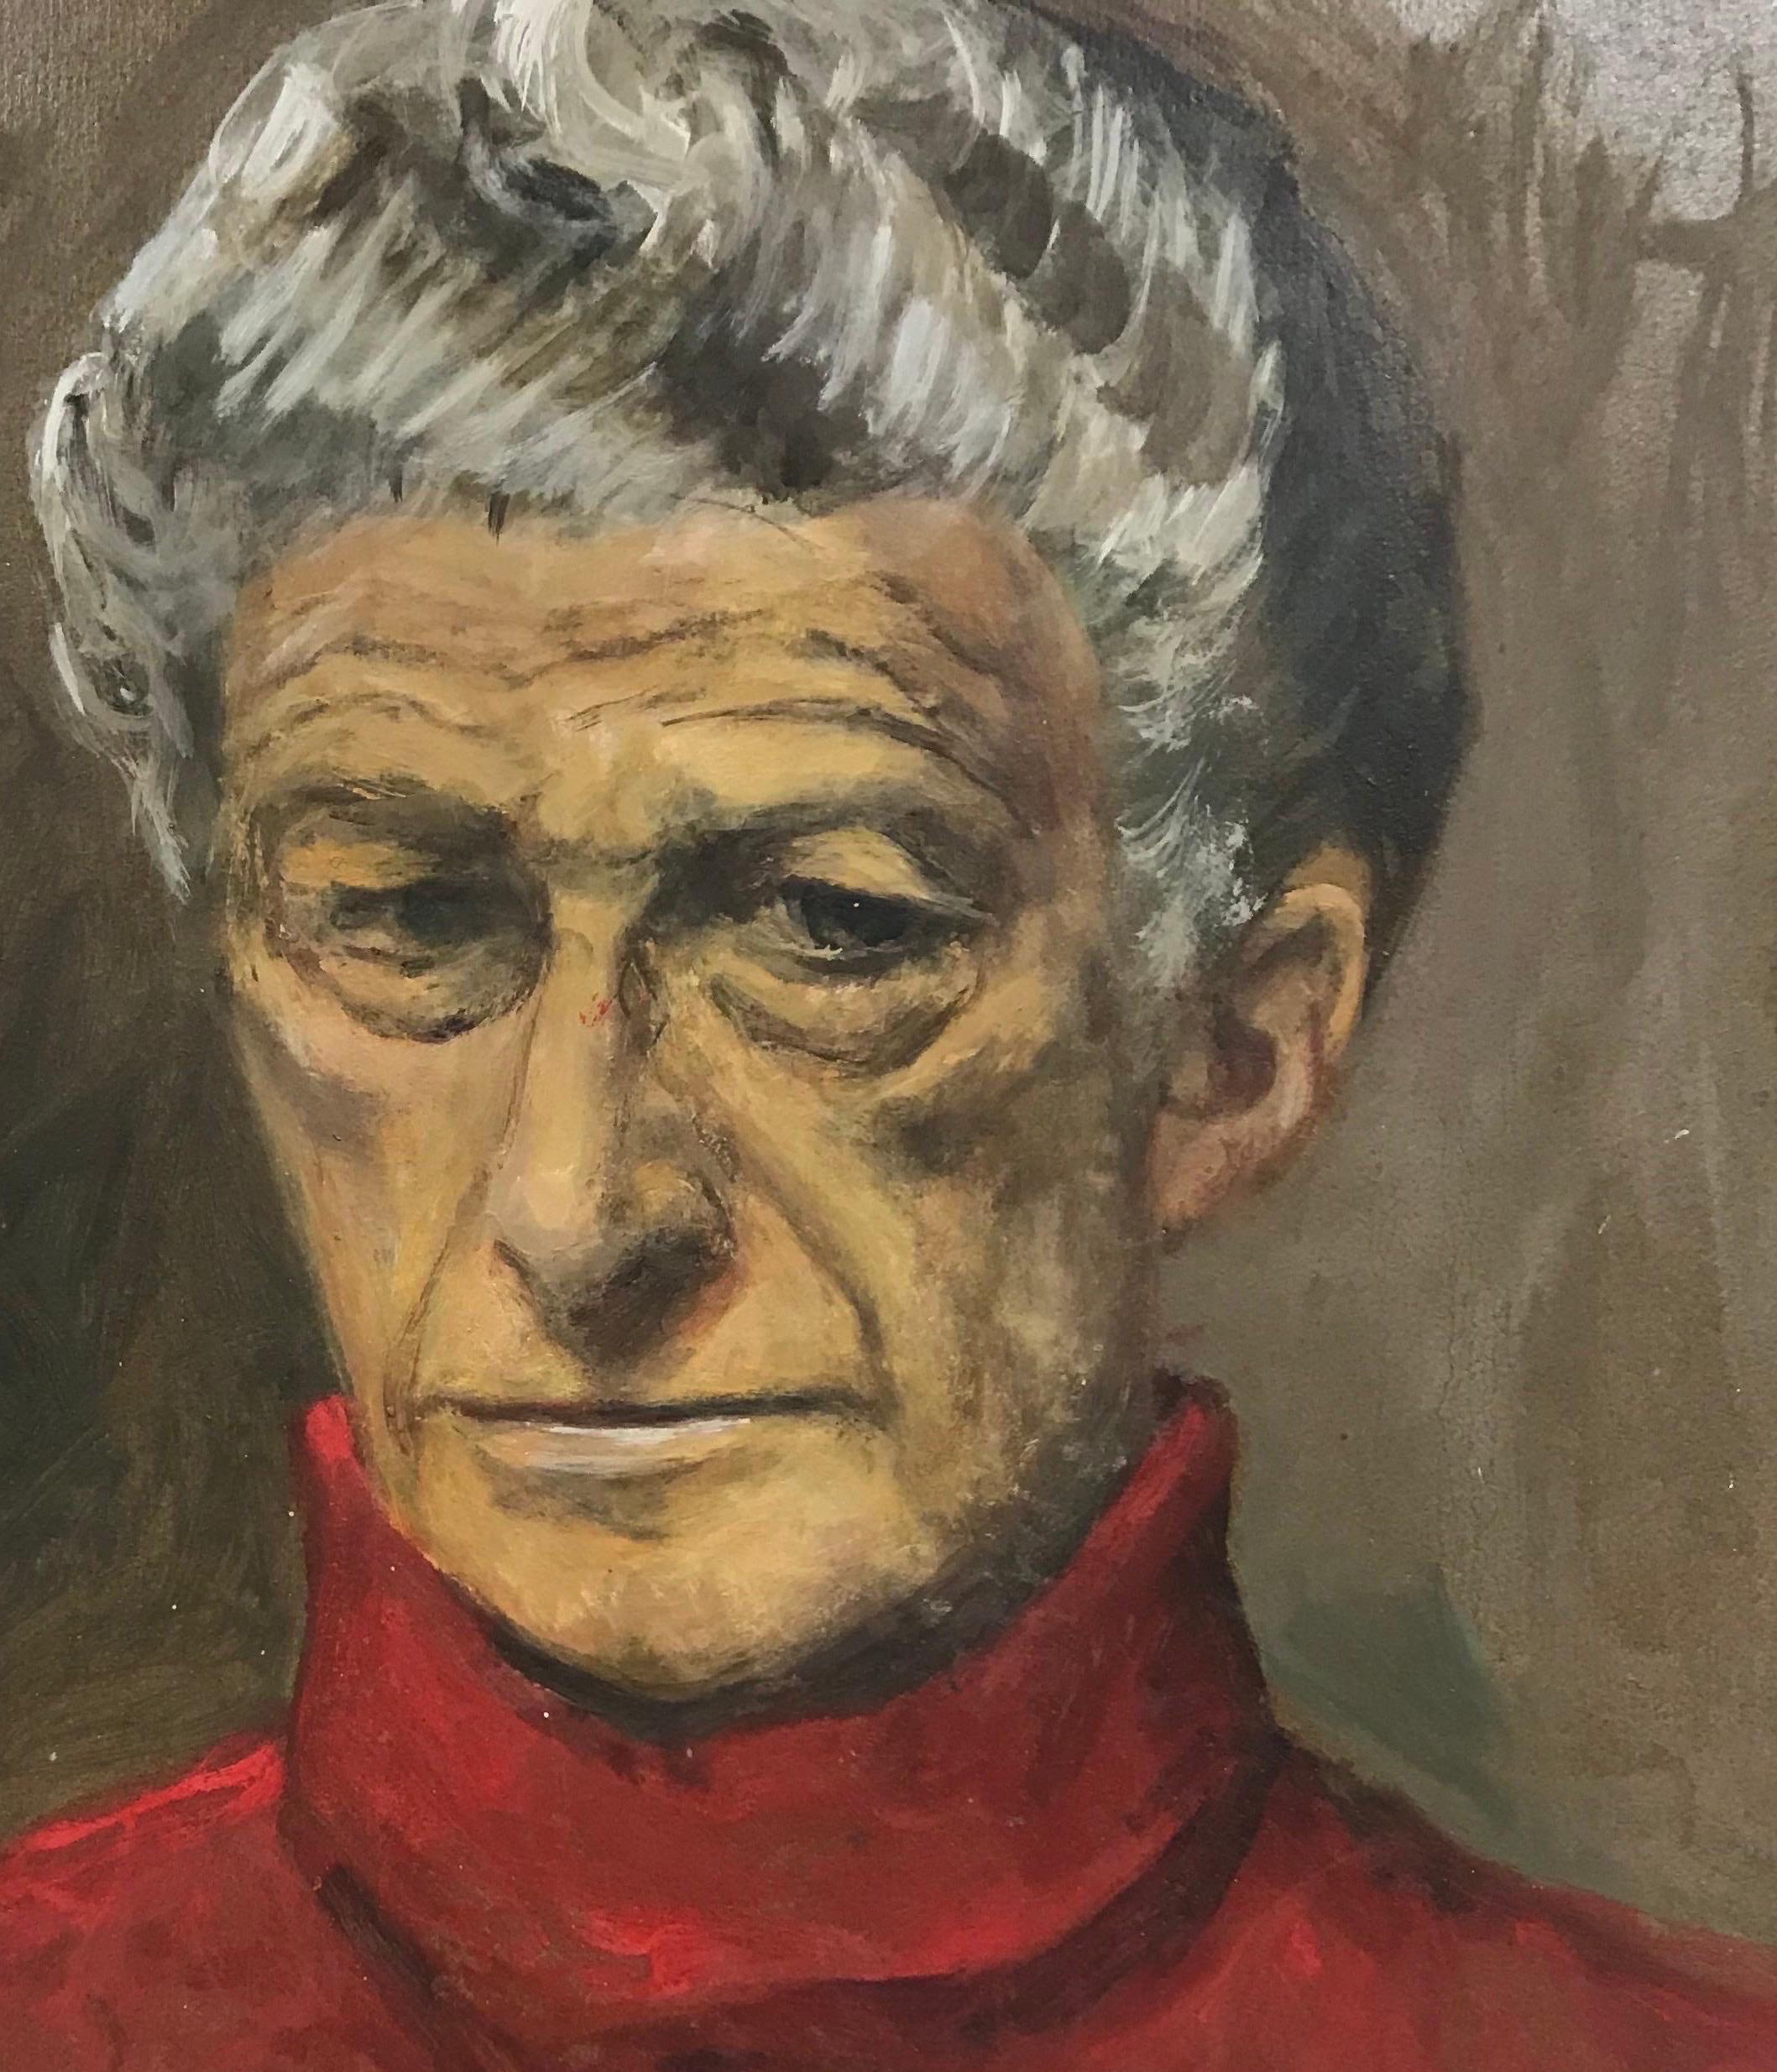 Artist/ School: French, signed and dated 84'

Title: Portrait of a man in a red polo neck jumper. 

Medium: oil on board, unframed and double sided image. 

Board : 18 x 15 inches

Provenance: private collection, France

Condition: The painting is